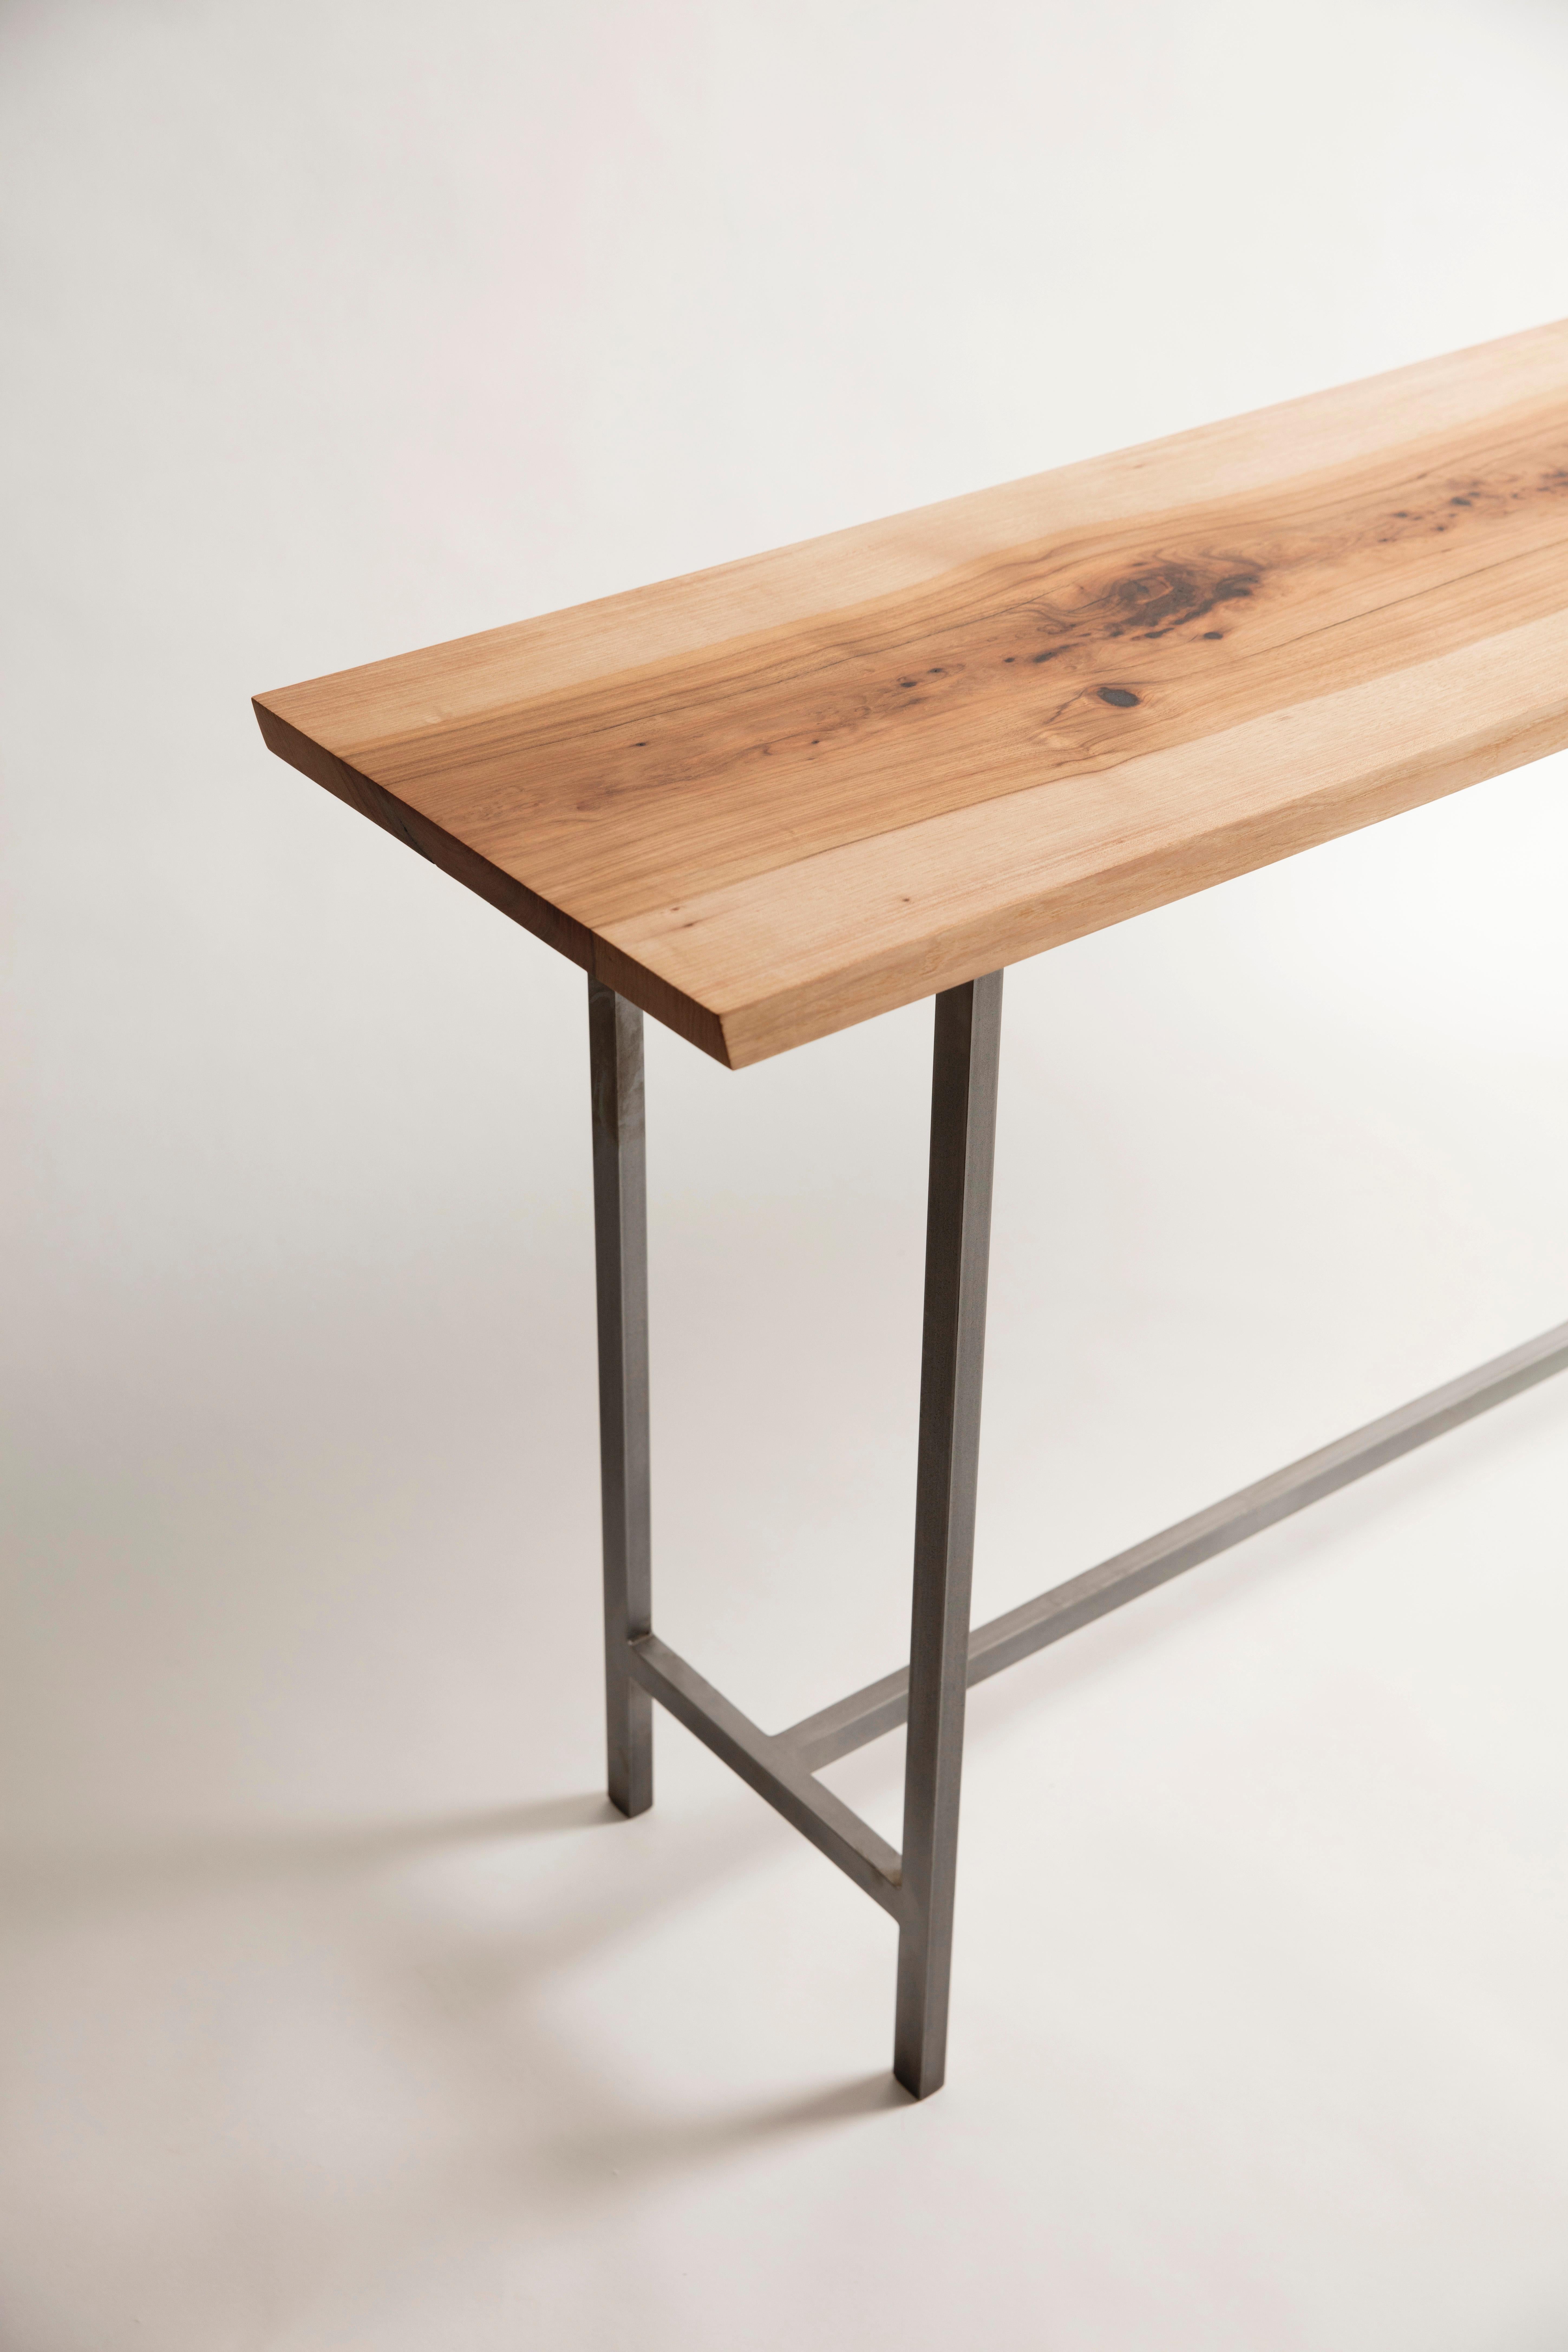 We call our narrow console table in solid wood and modern steel base the 